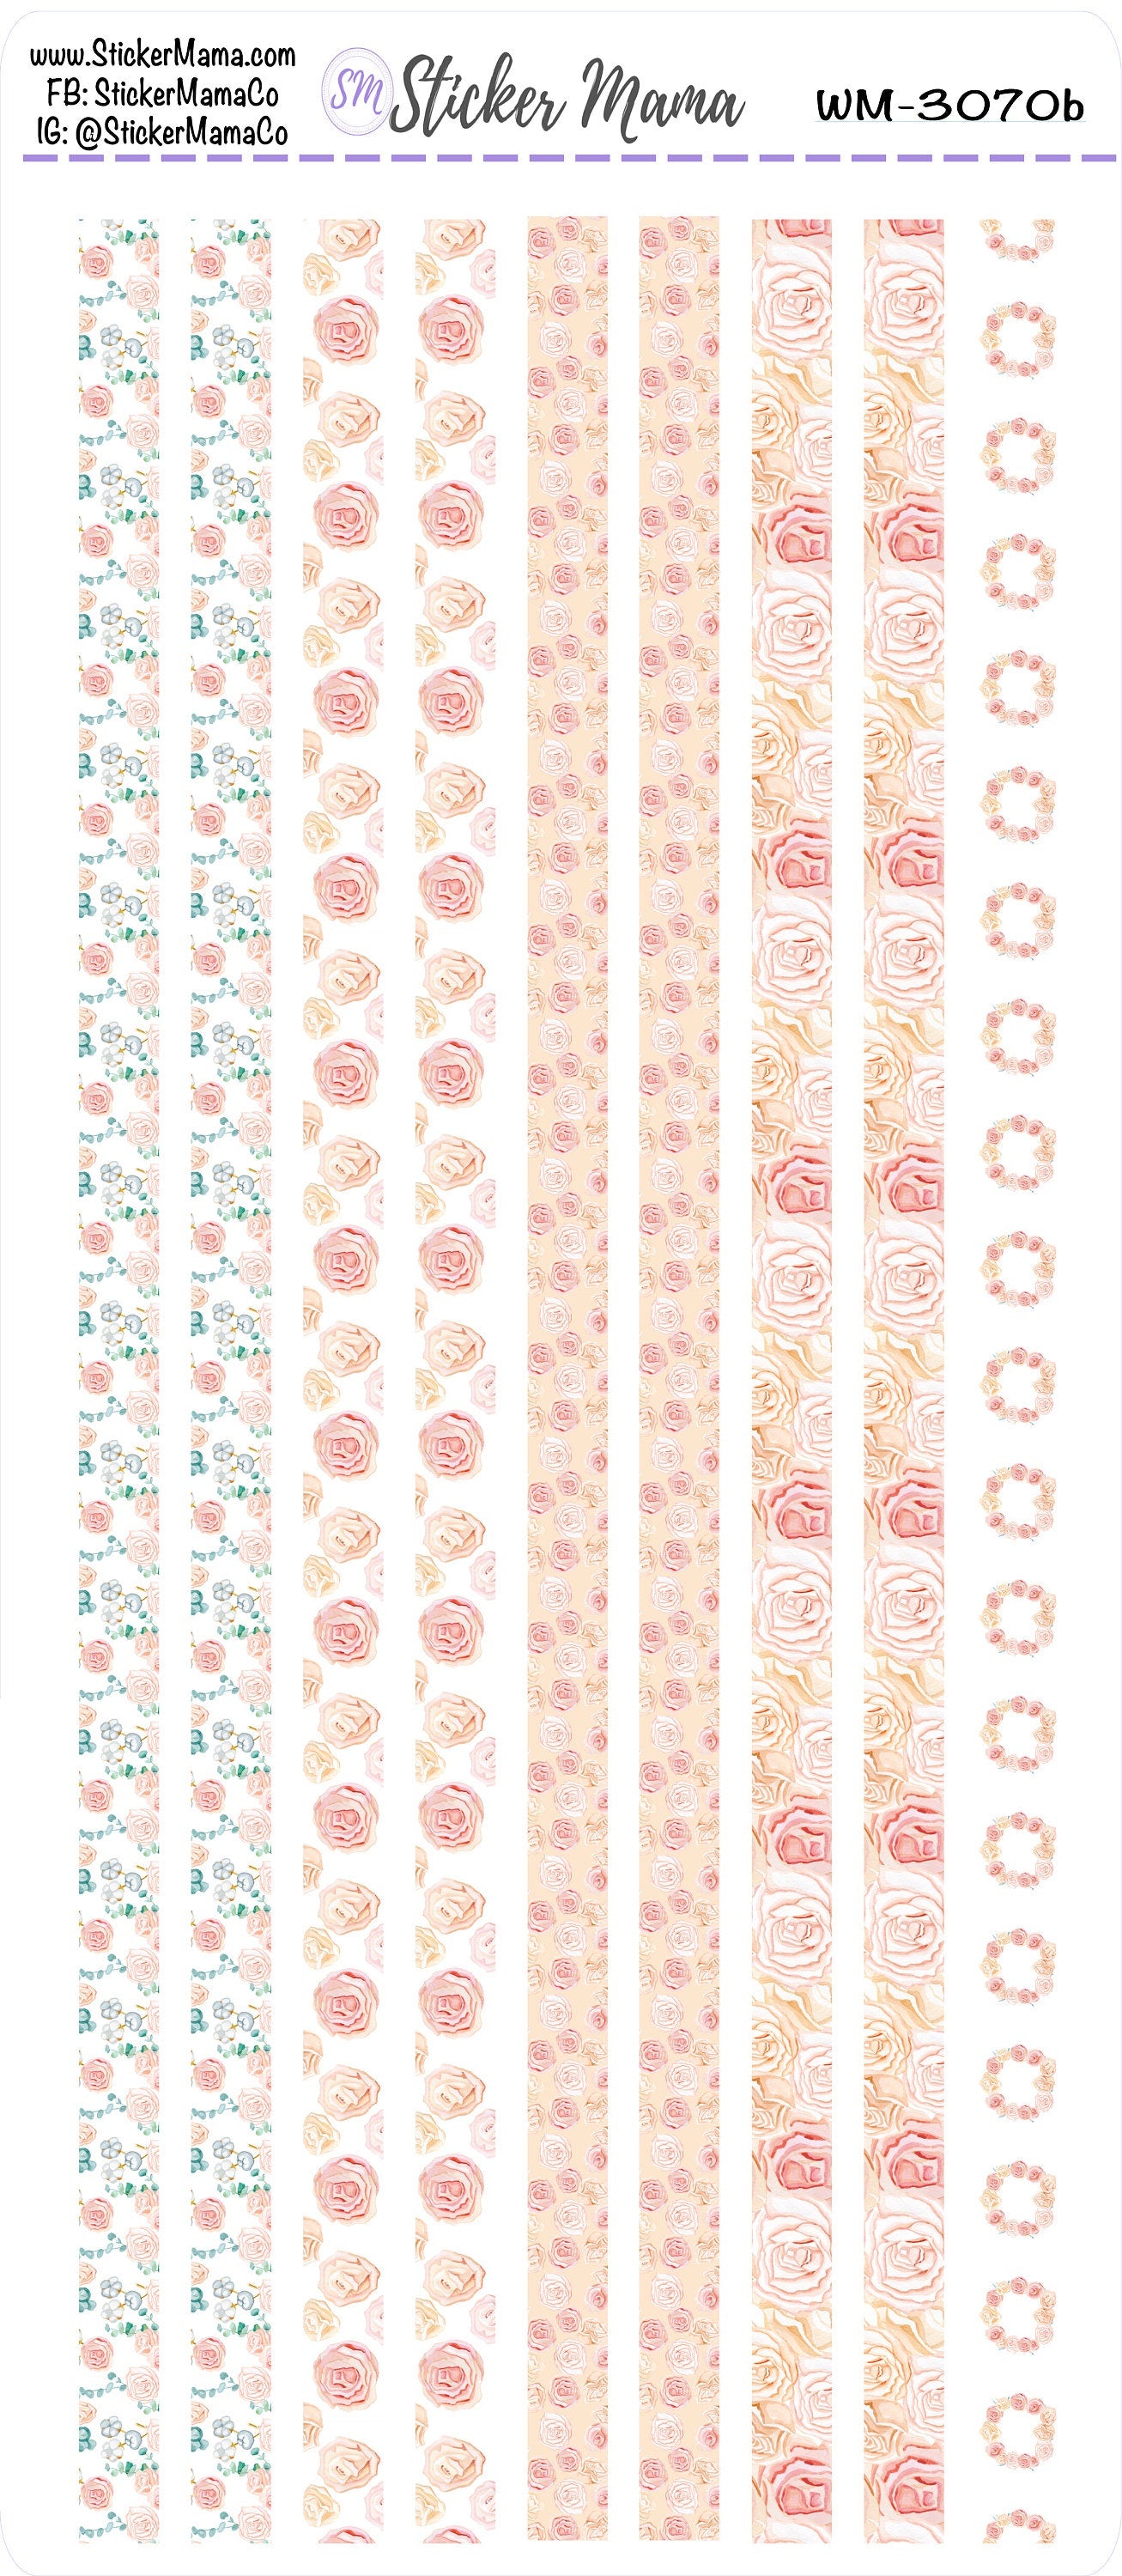 W-3070 - WASHI STICKERS - Romantic Flowers - Planner Stickers - Washi for Planners